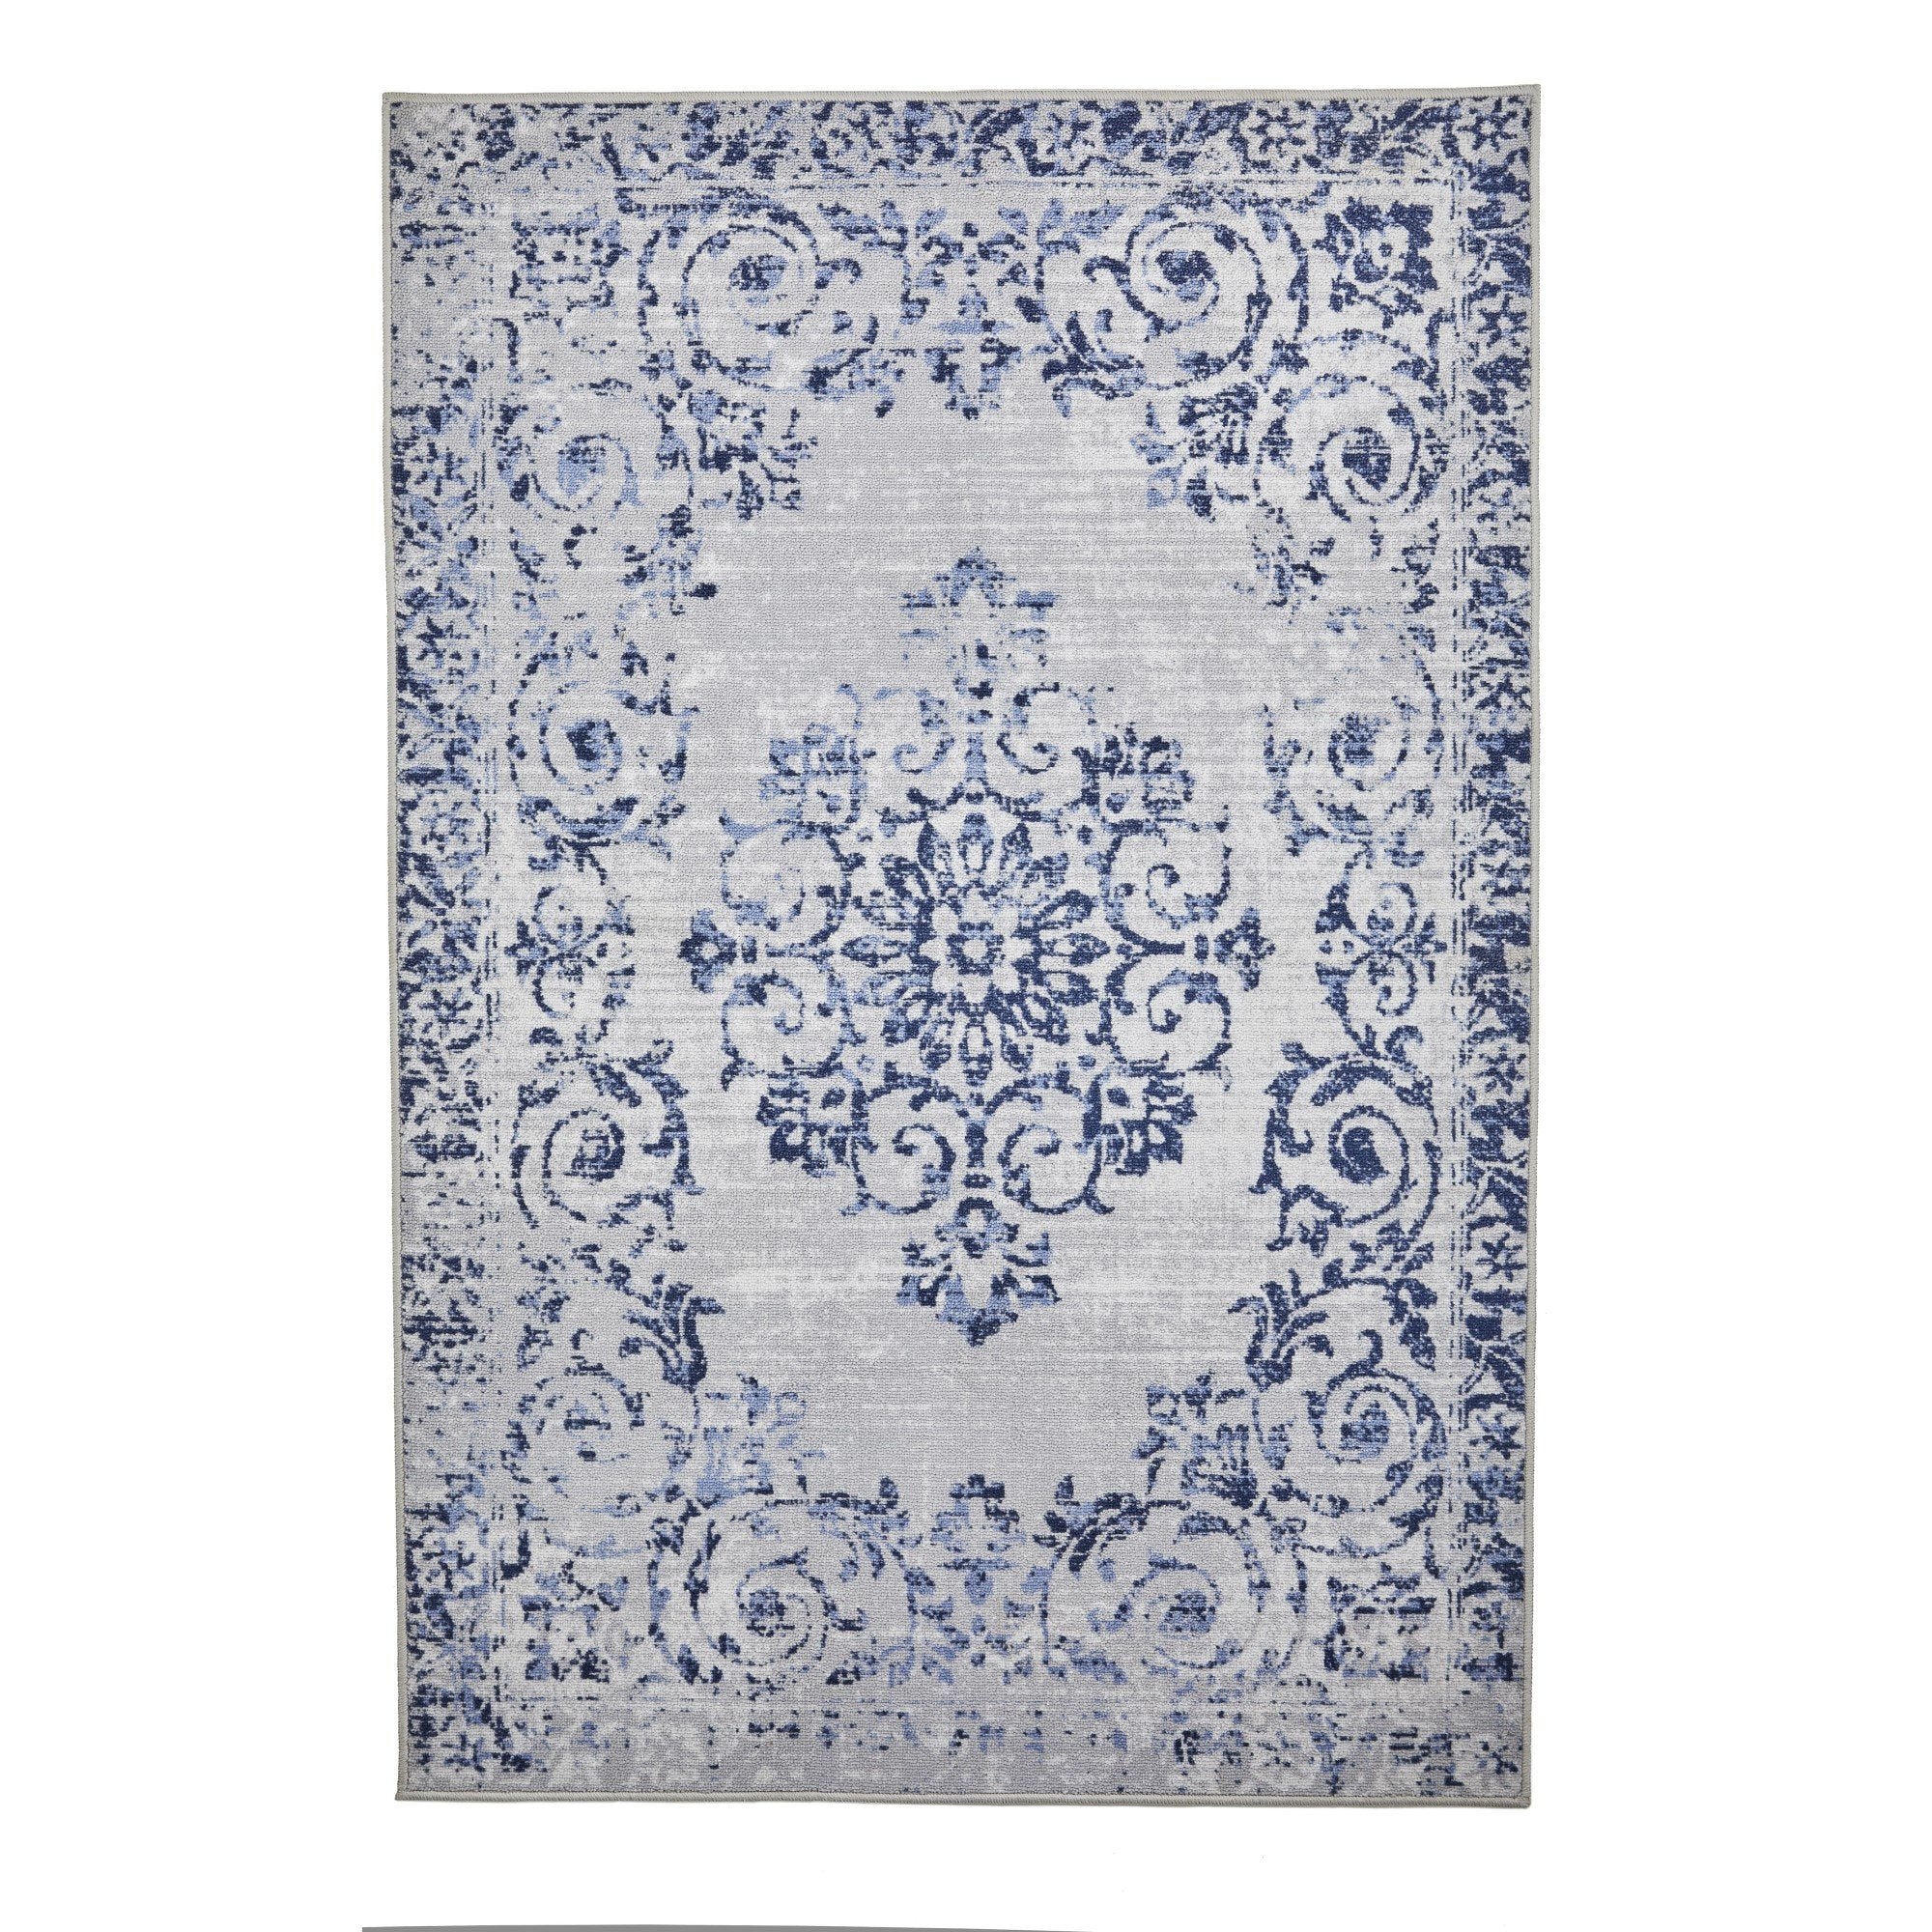 Washable Rug Faraday by Dreams & Drapes Design in Blue